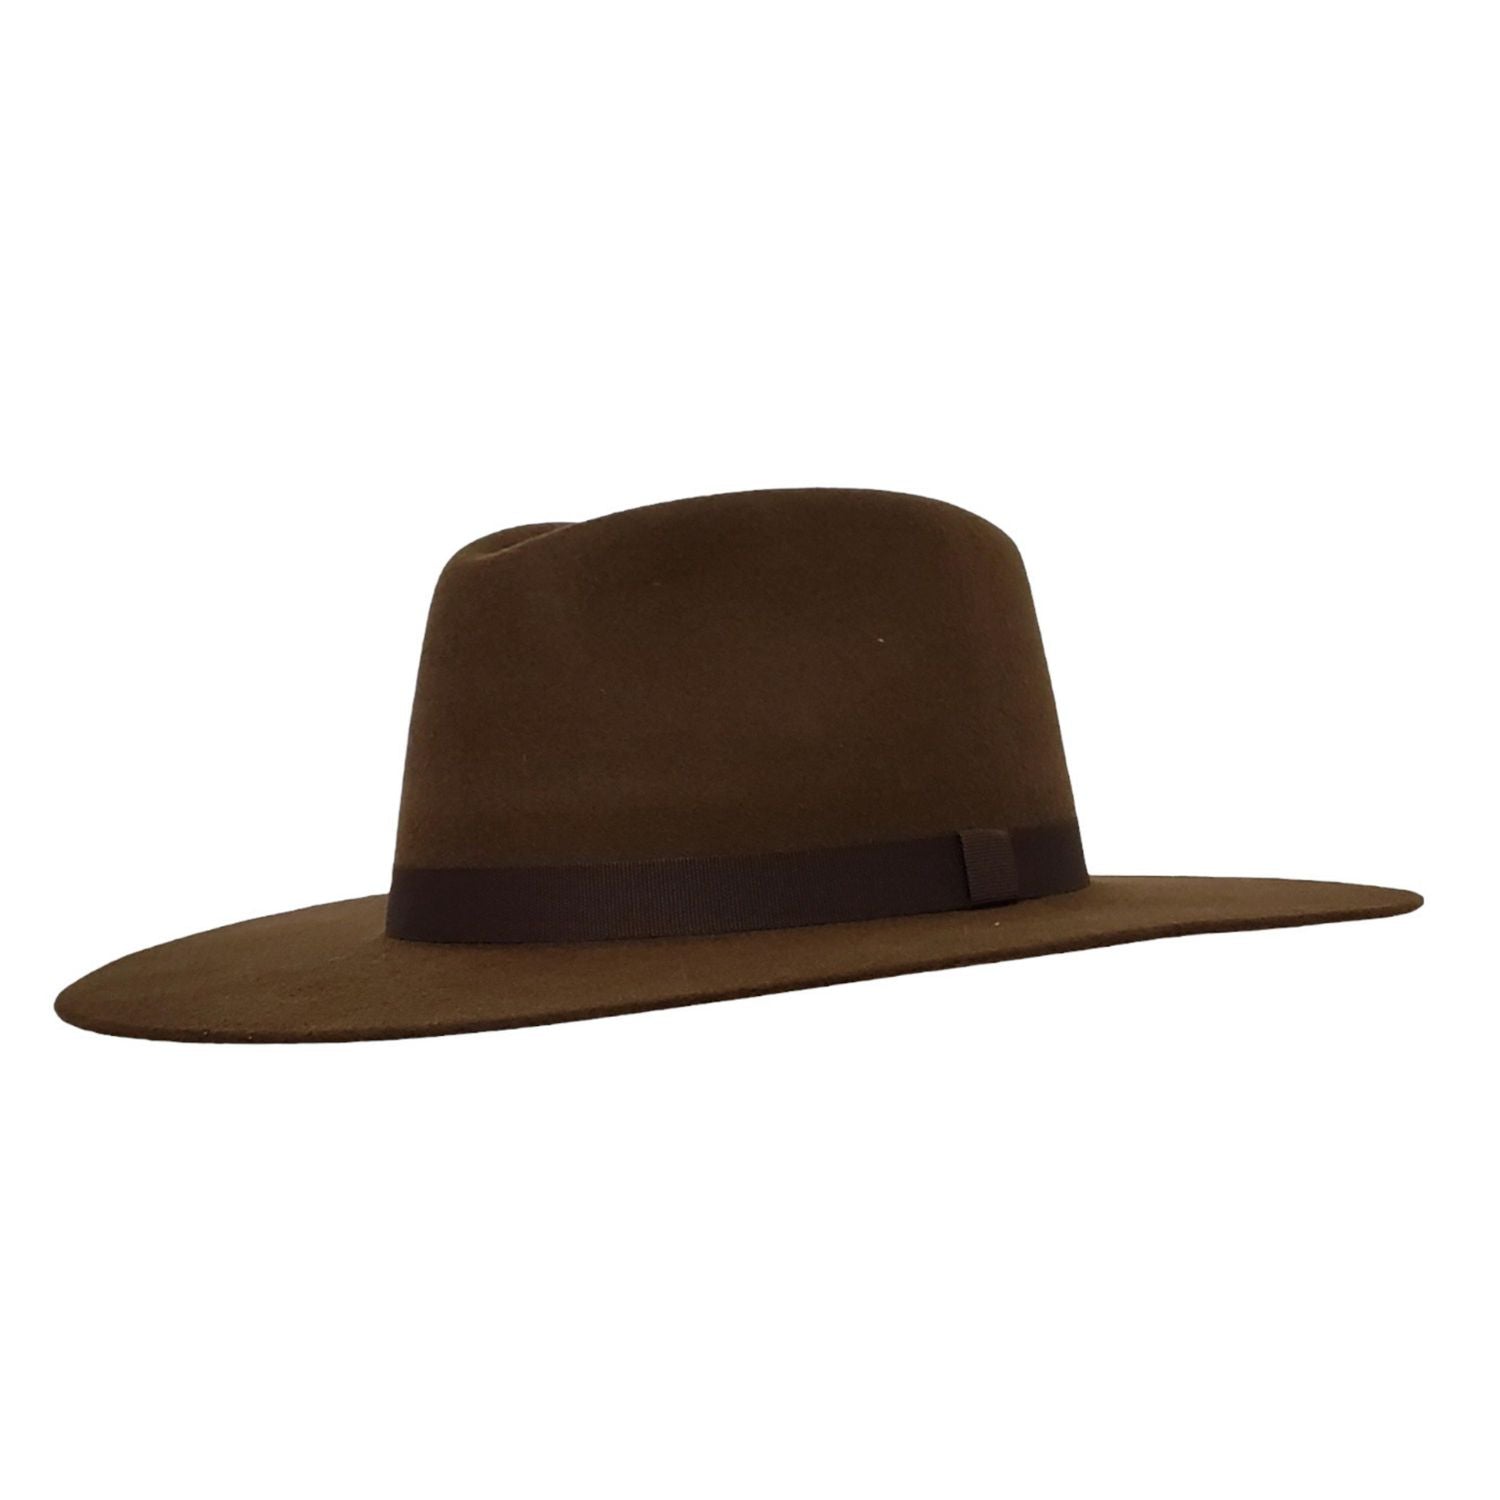 Gone Country Hats Men & Women's Hats Small  fits 6-7/8 to 7 Drifter Brown - Wool Cashmere